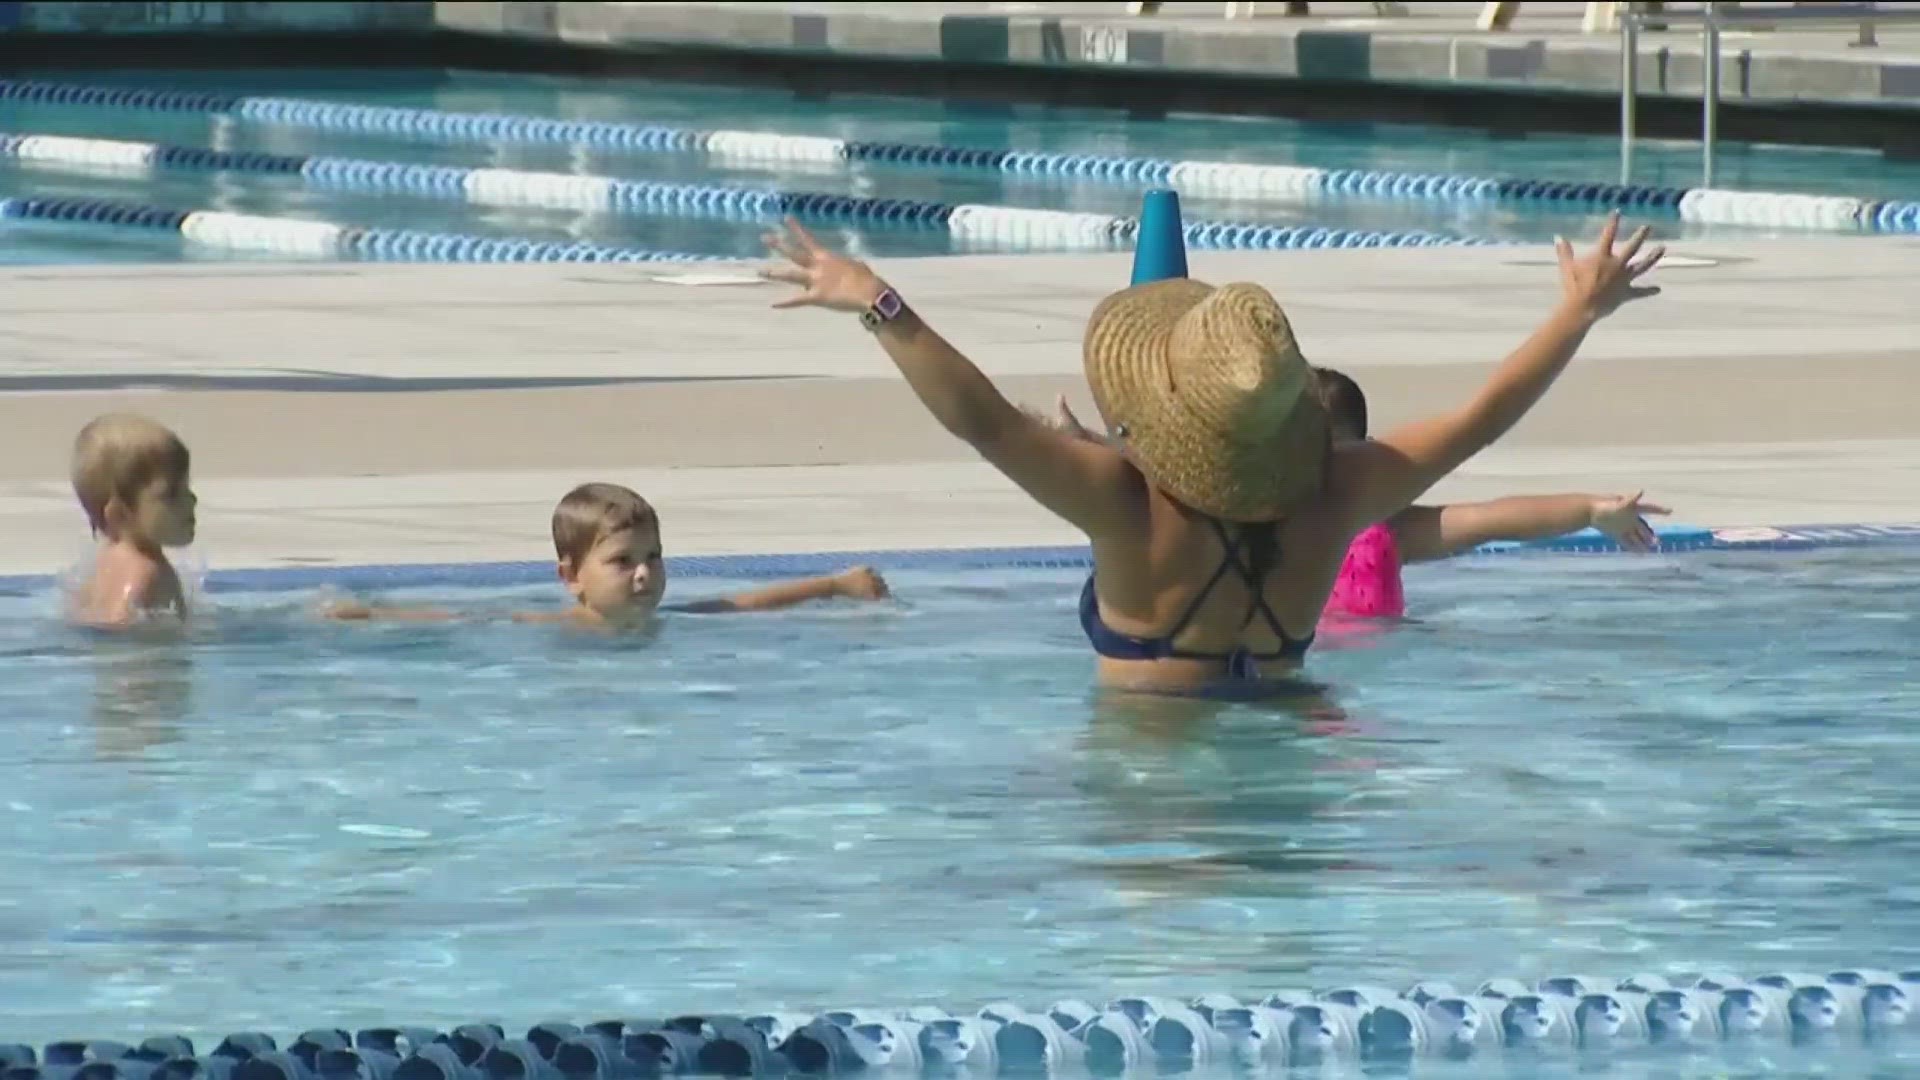 According to the CDC, drowning is the single leading cause of death of children ages 1 to 4 years old.